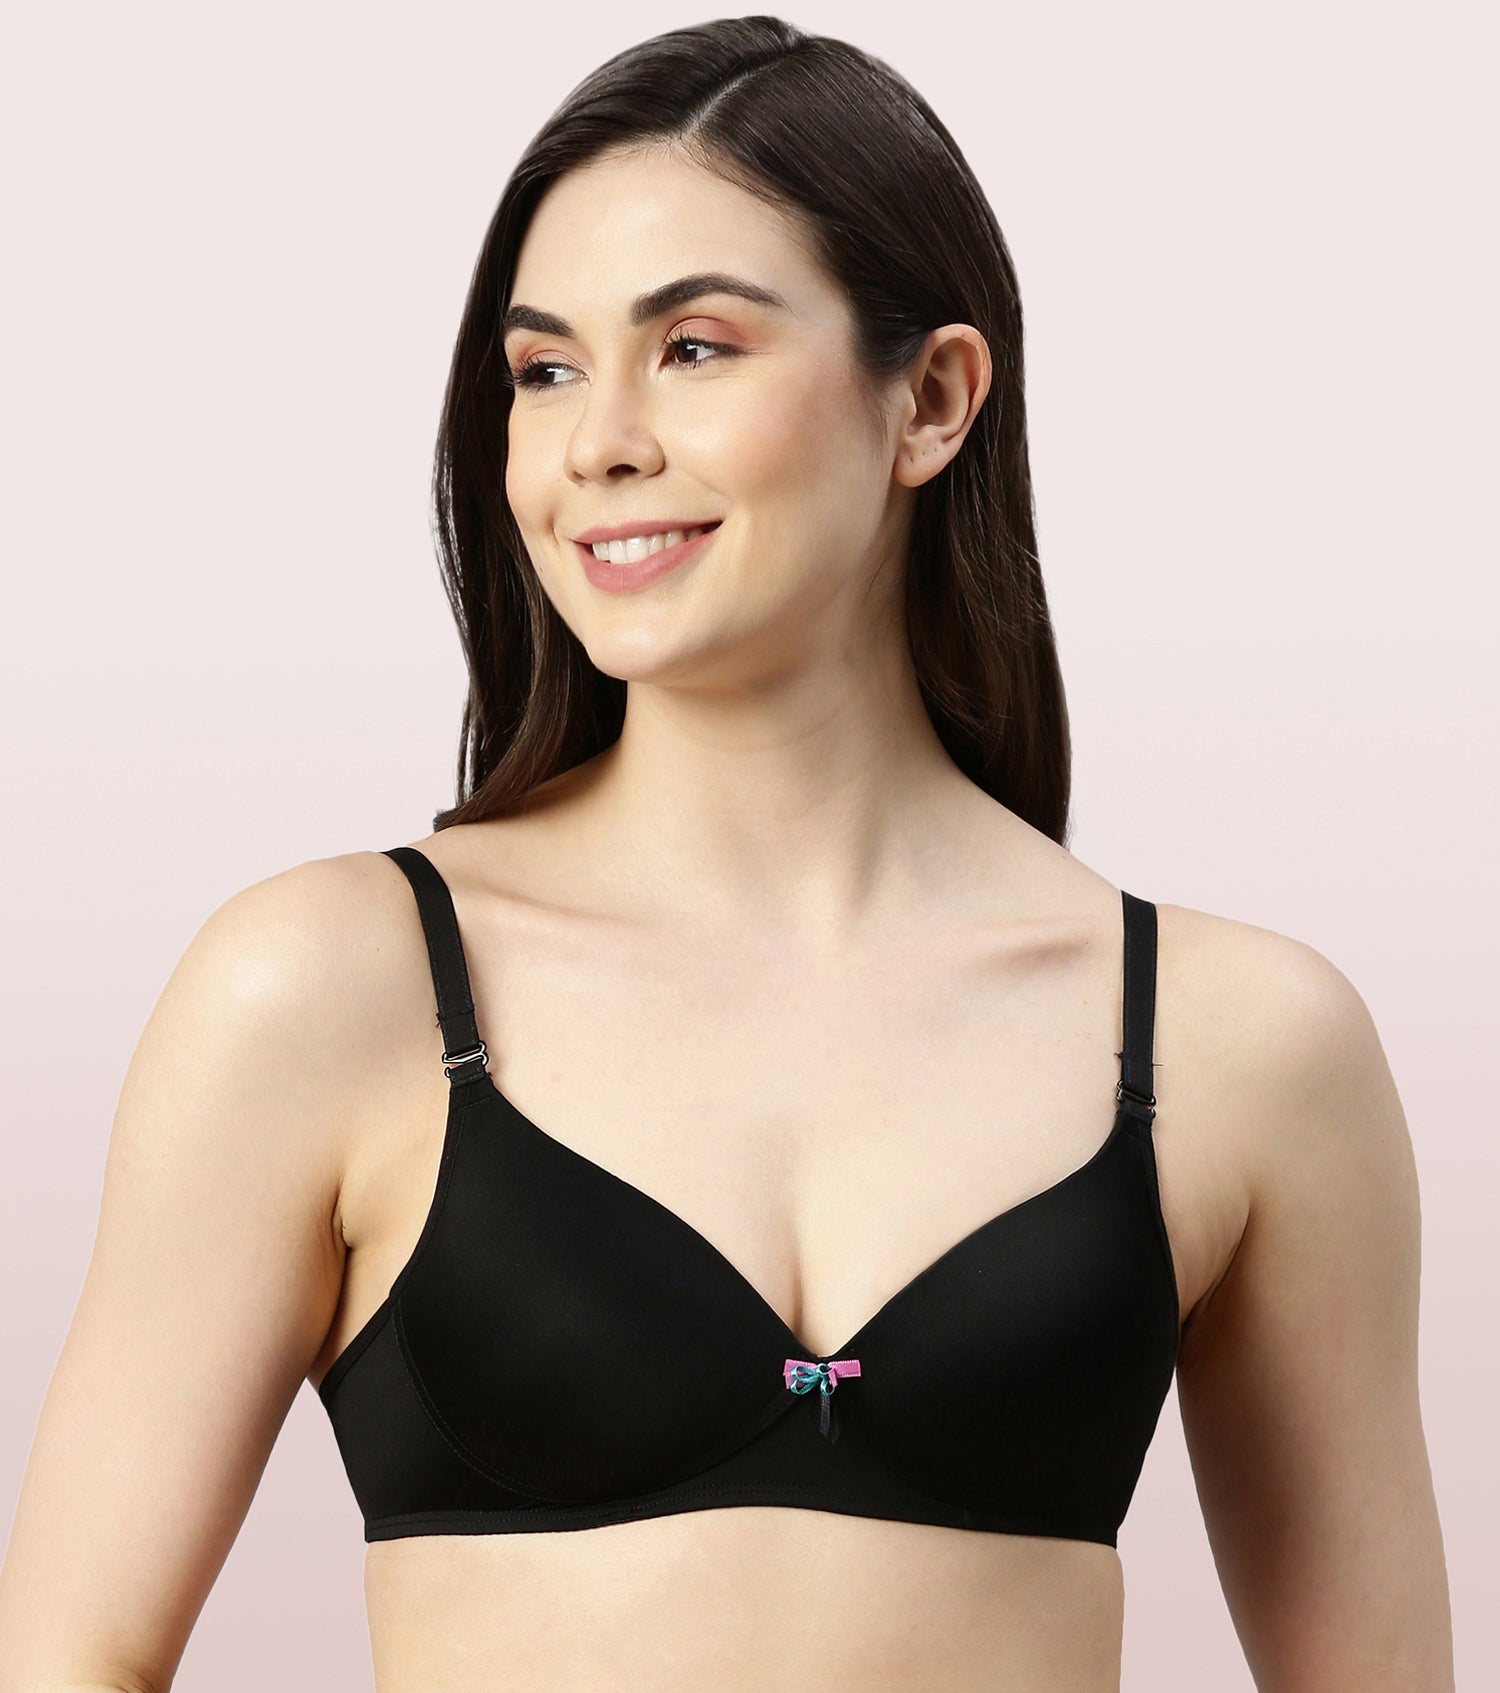 Enamor A019 Perfect Shaping Wirefree Cotton Strapless Bra Non-Padded Full  Coverage in Hyderabad at best price by Ss Retails (Jockey Stores) - Justdial